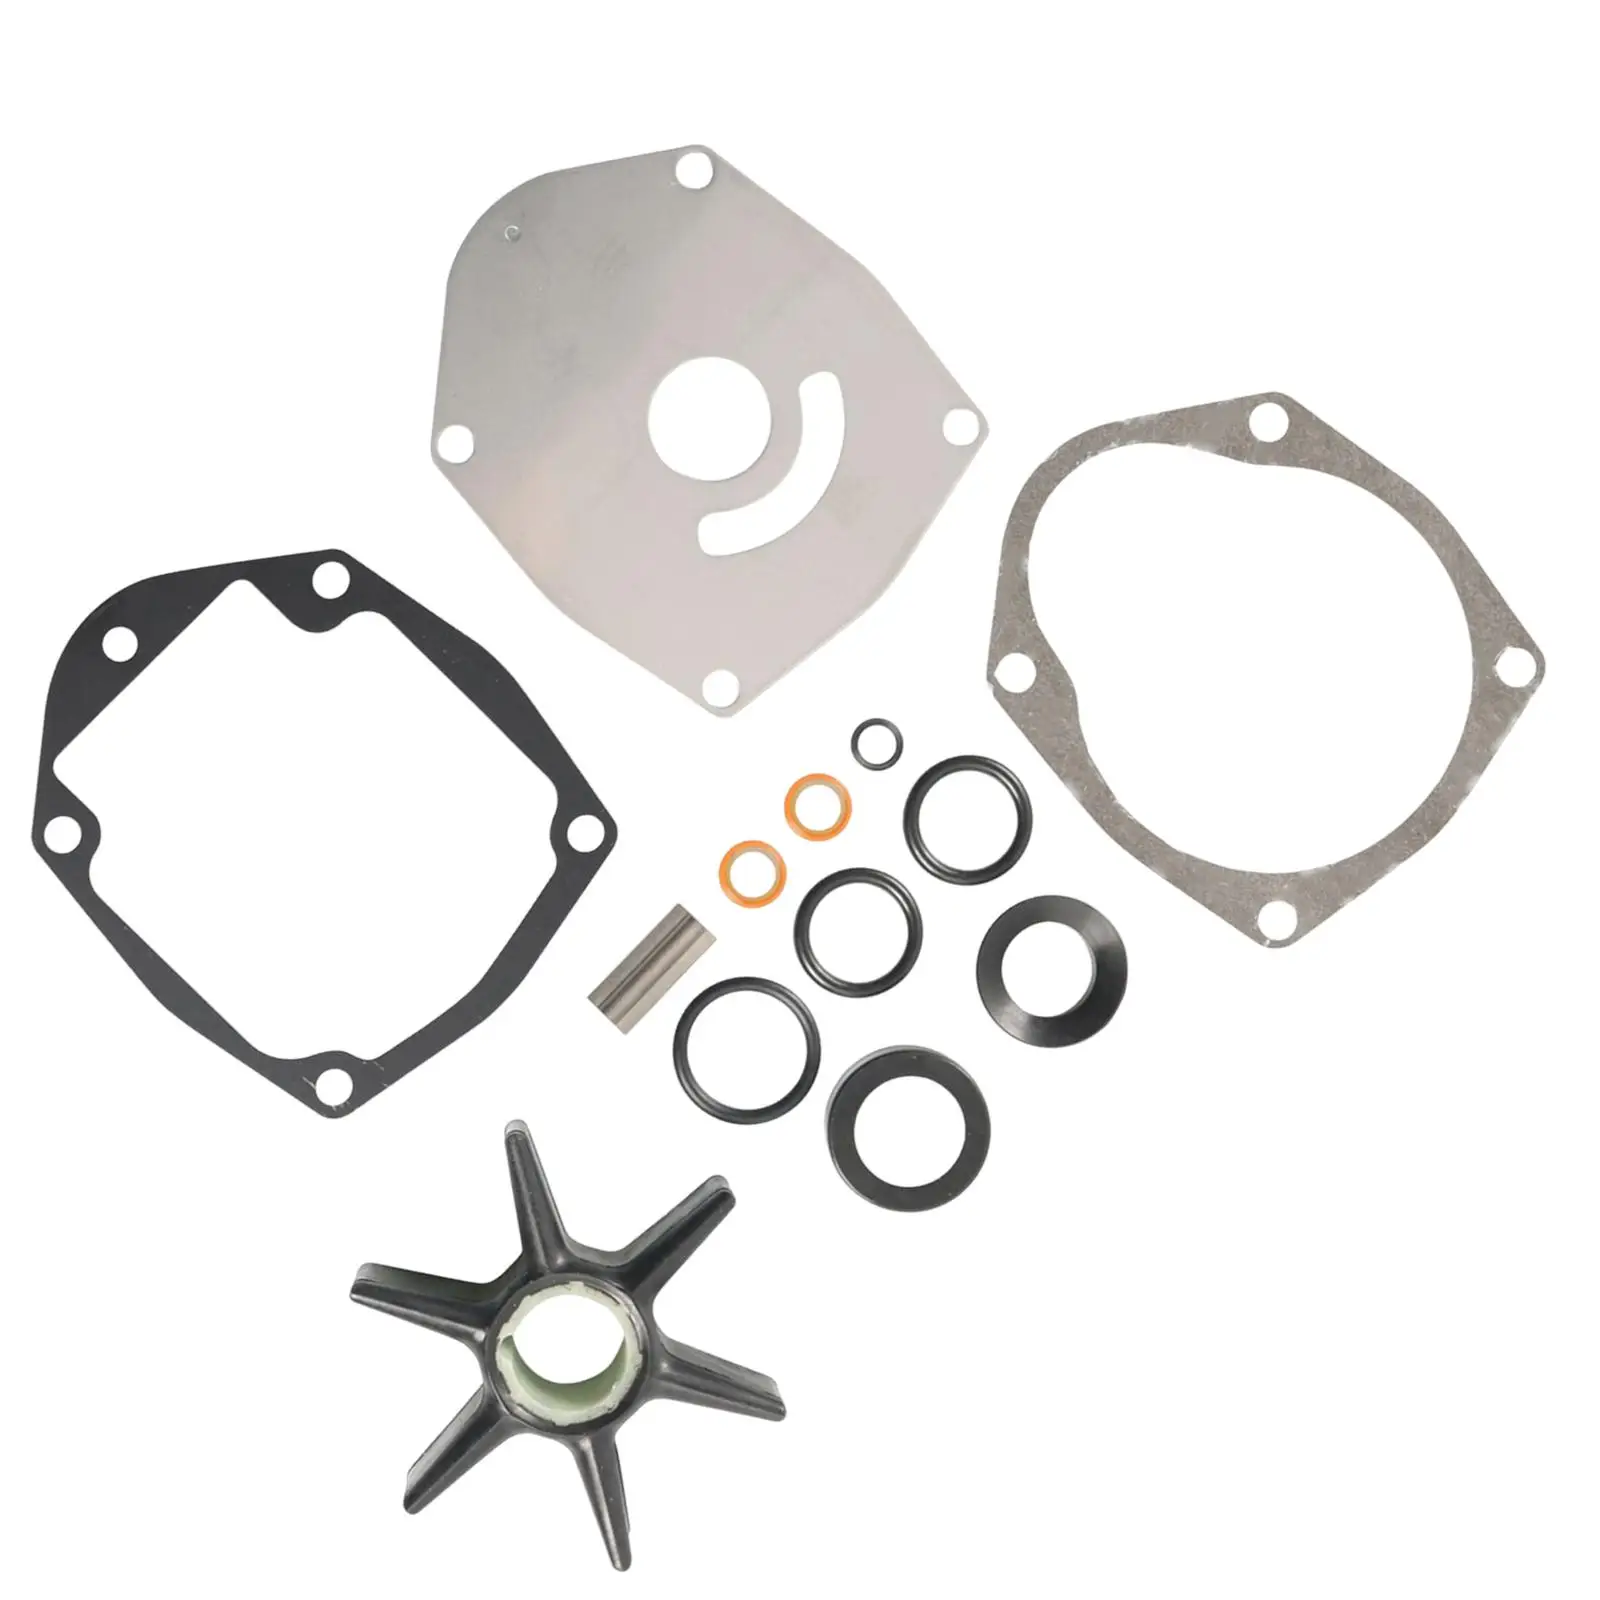 15 Pieces Water Pump Impeller Repair Kit 8M0100526 Fit for Mercury Marine Outboard Engines Replacement